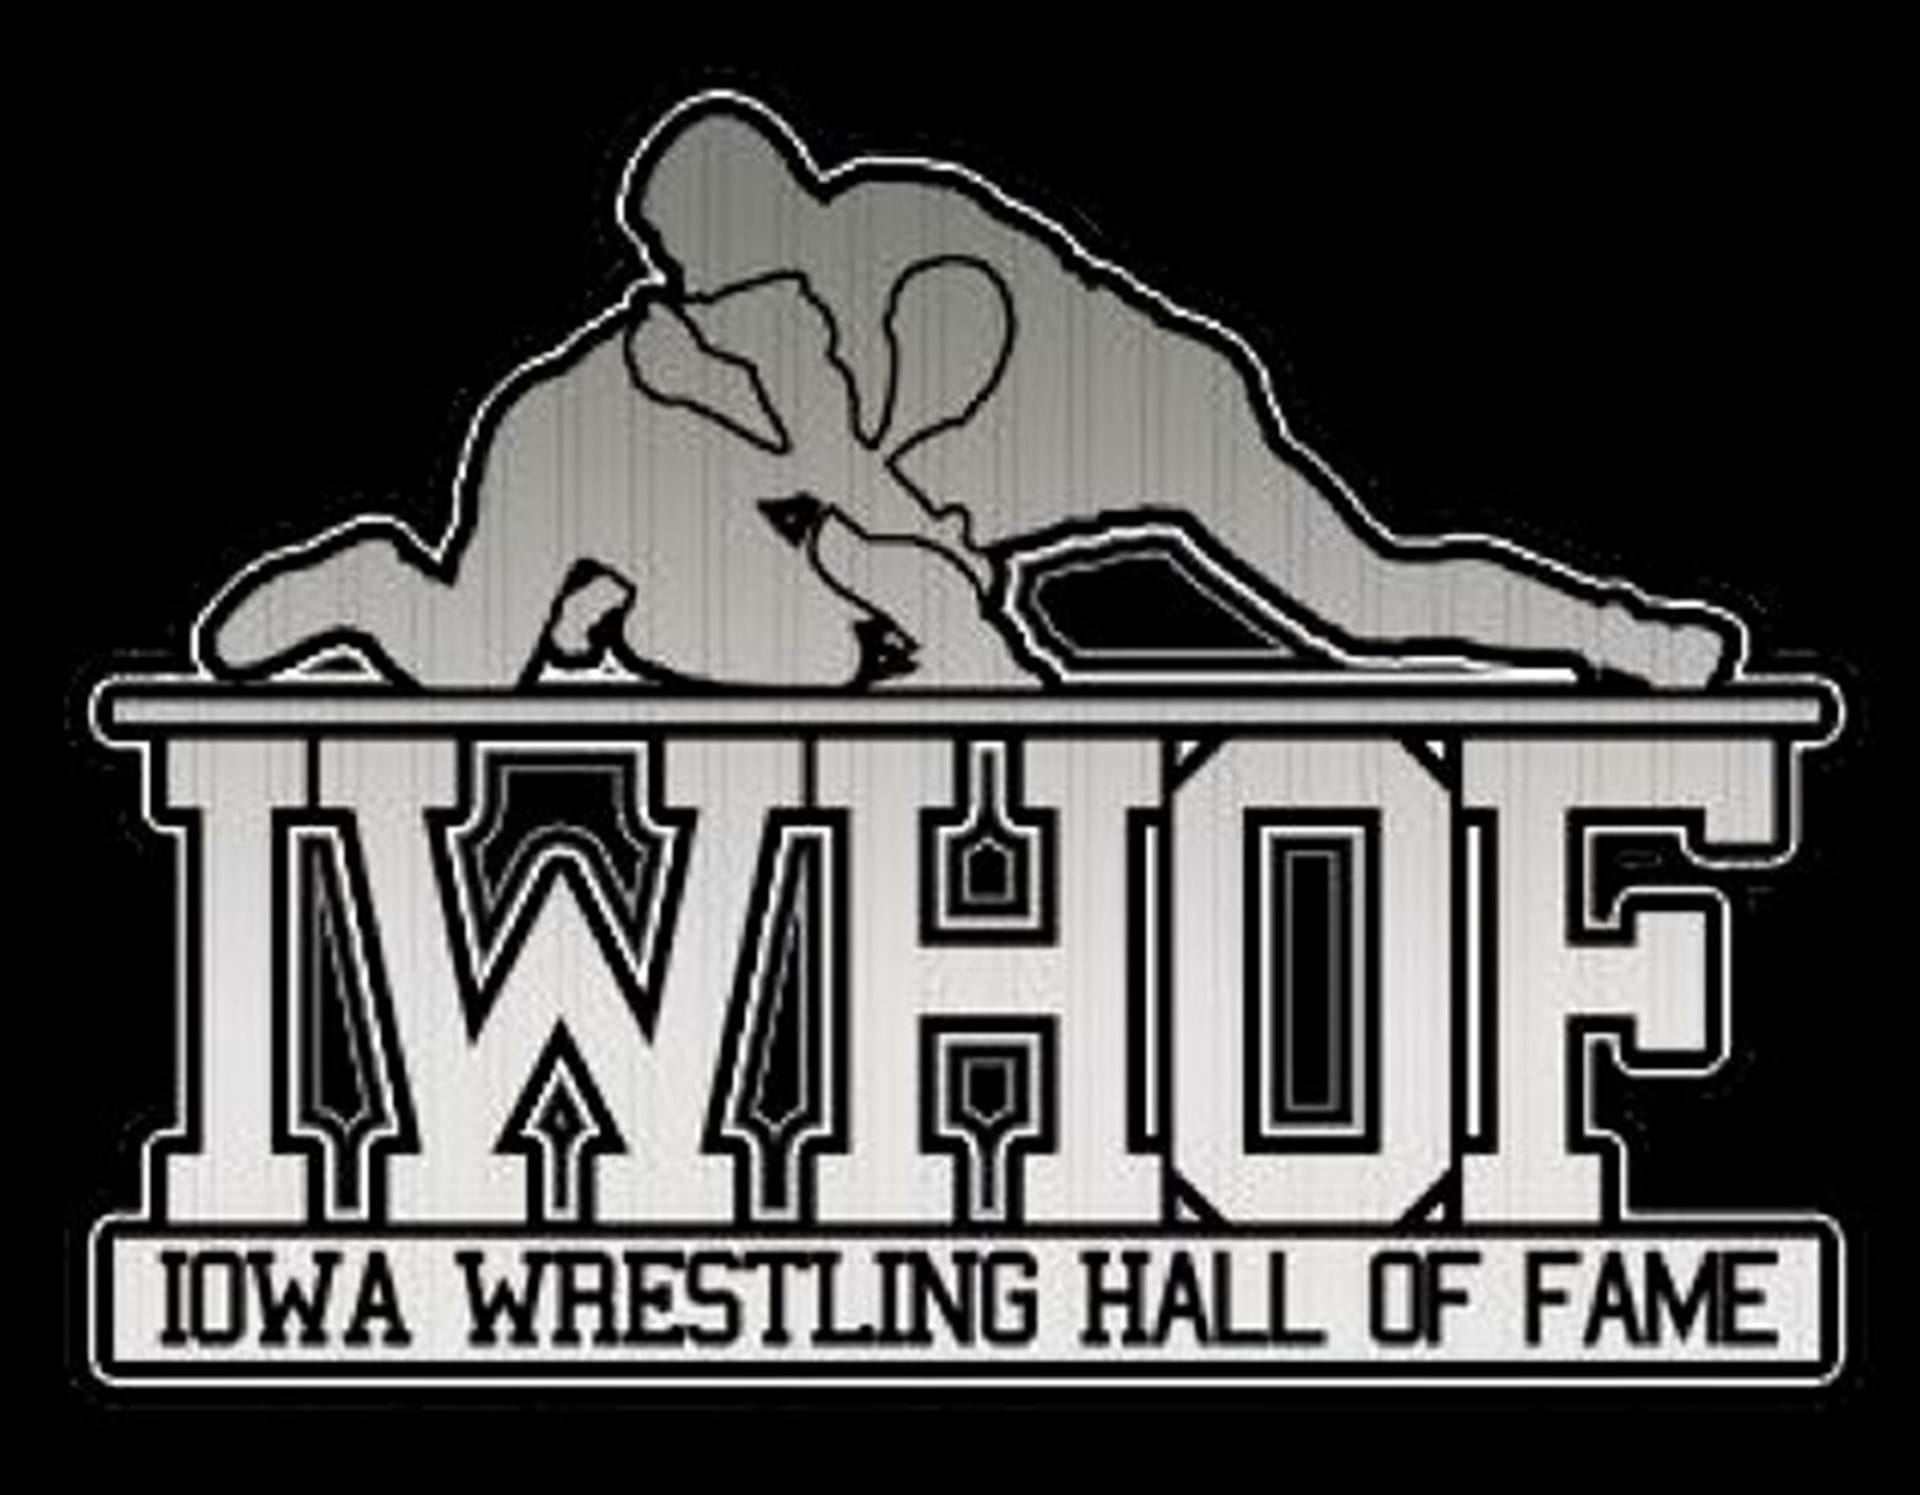 Check out the new IWHOF website